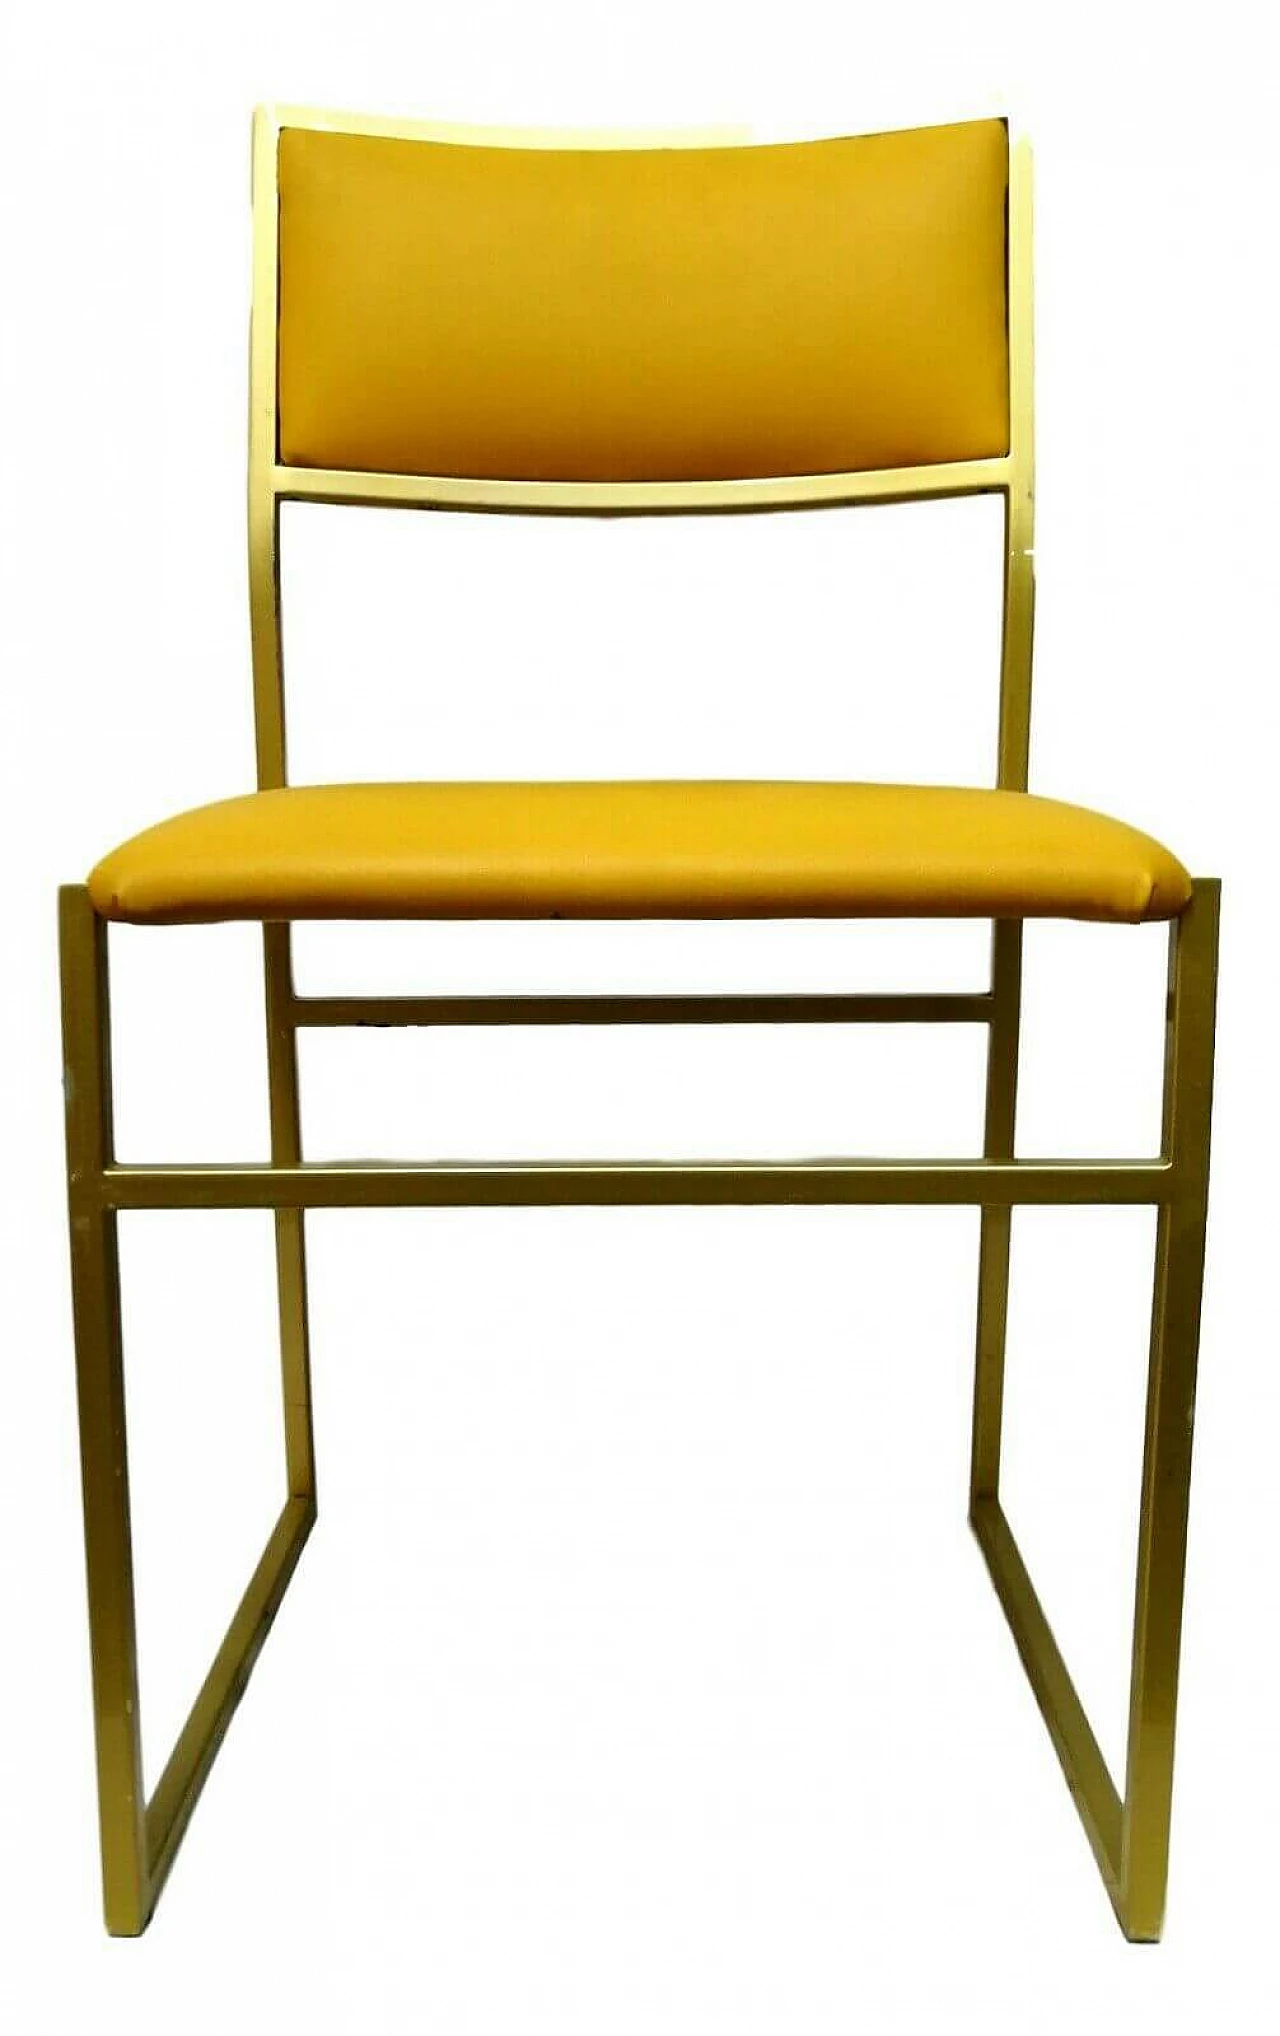 Metal chair and seat yellow, 70s 1166239